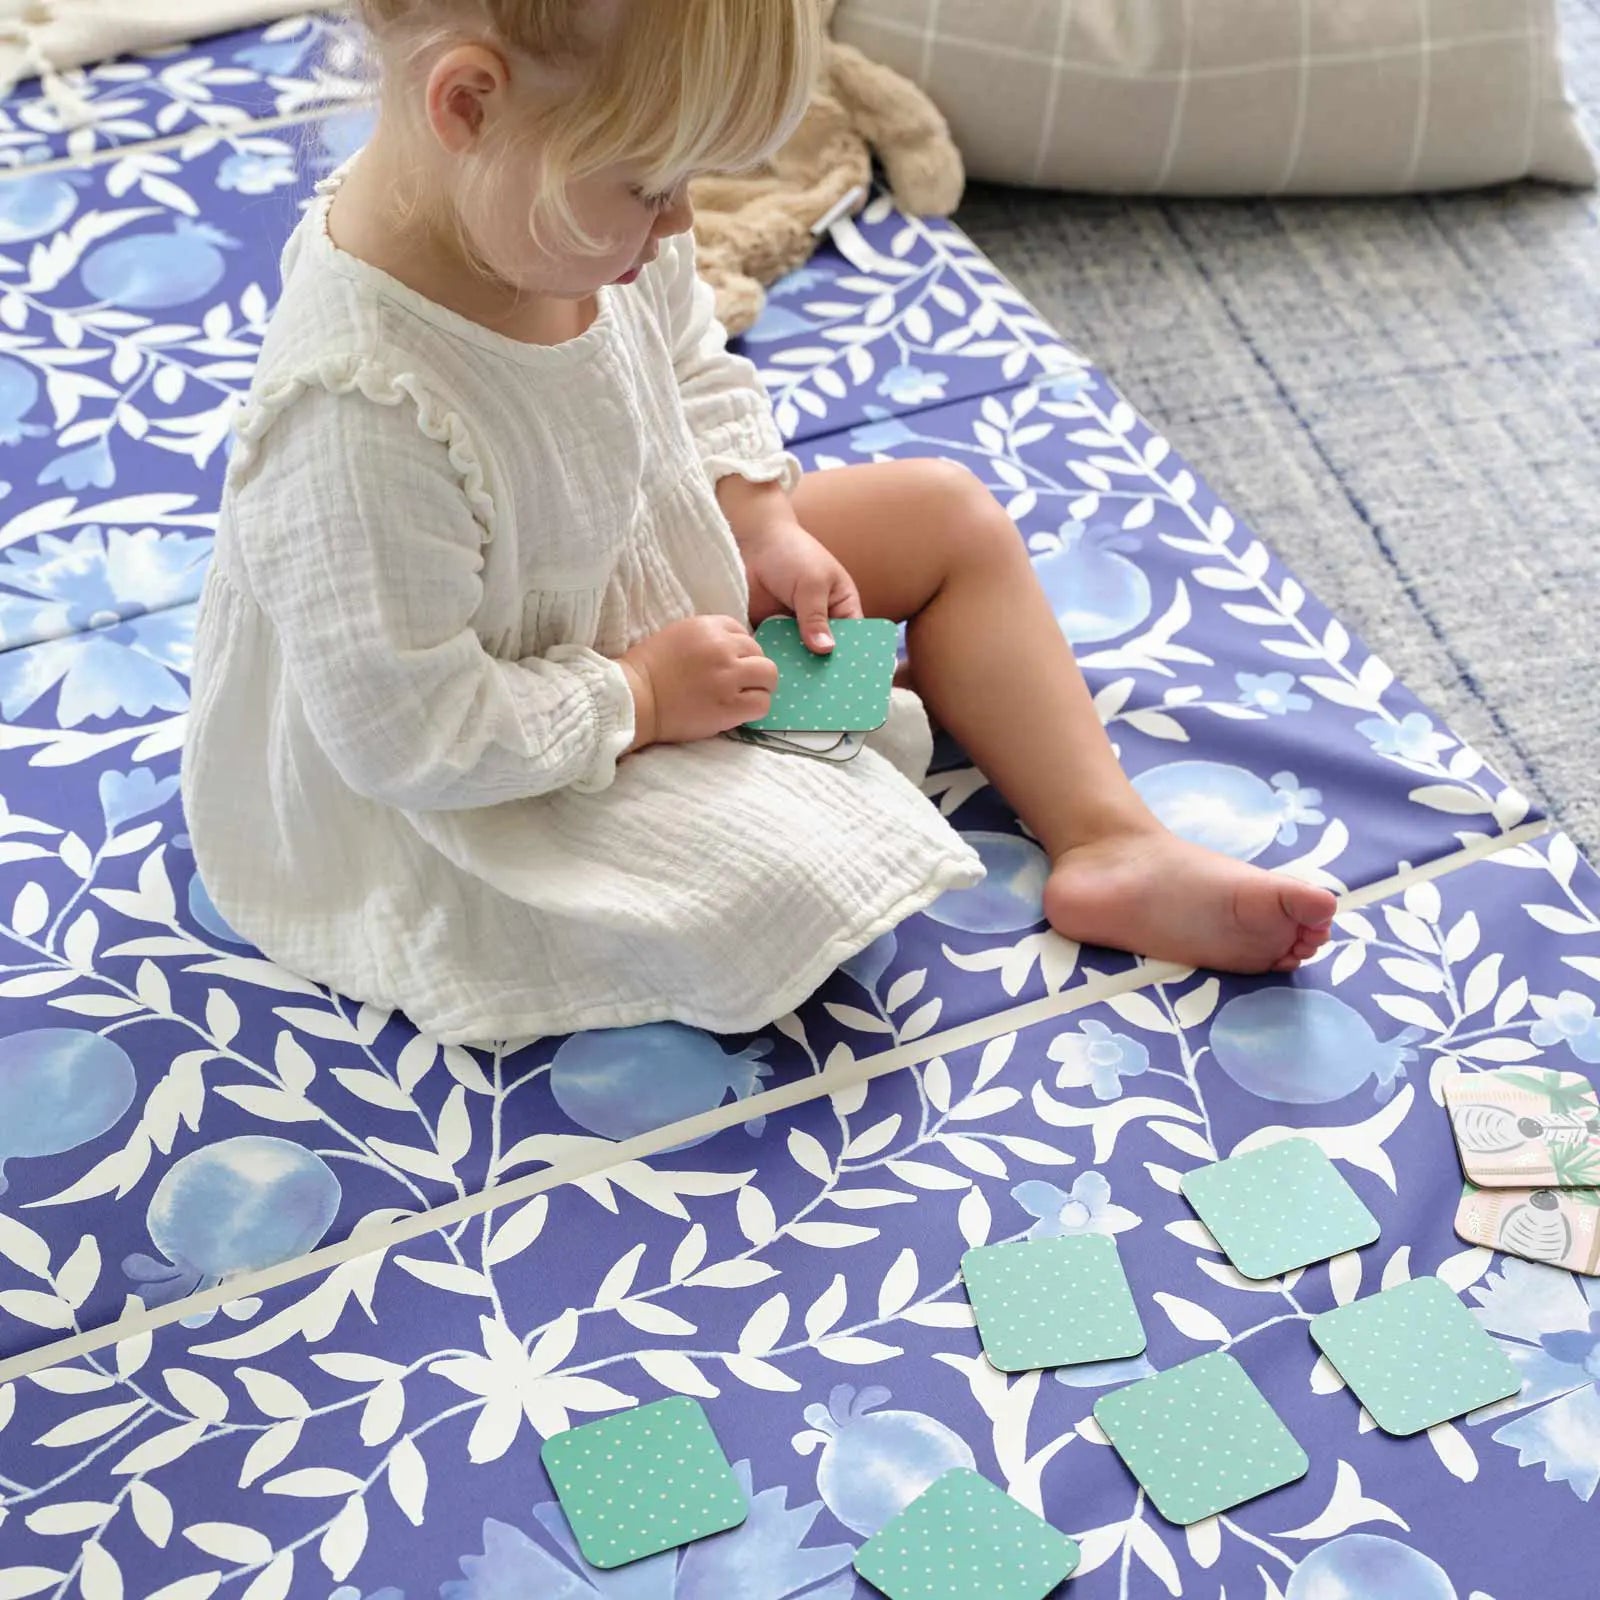 Deep sea blue and white floral tumbling mat shown with toddler girl sitting on the mat playing a memory card game